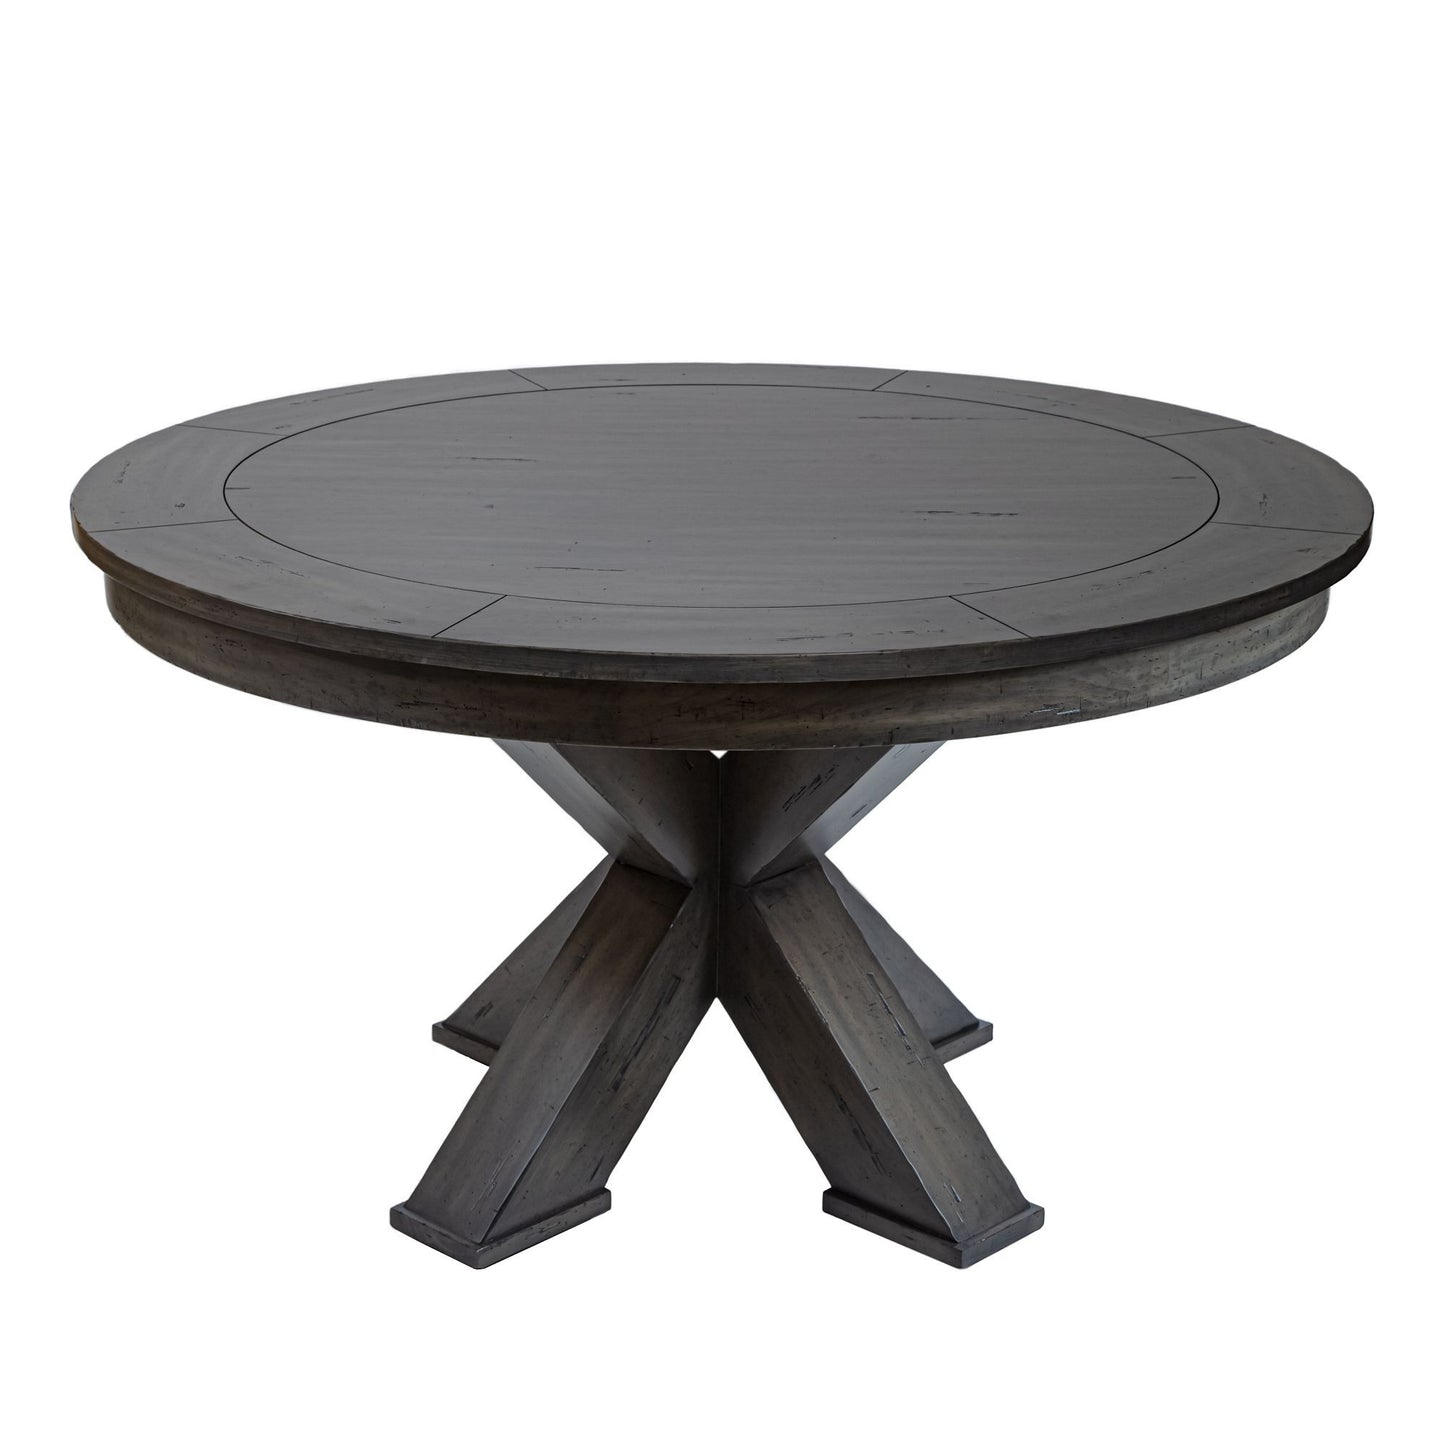 Darafeev Duke Round Poker Dining Table 8 Person - Just Poker Tables